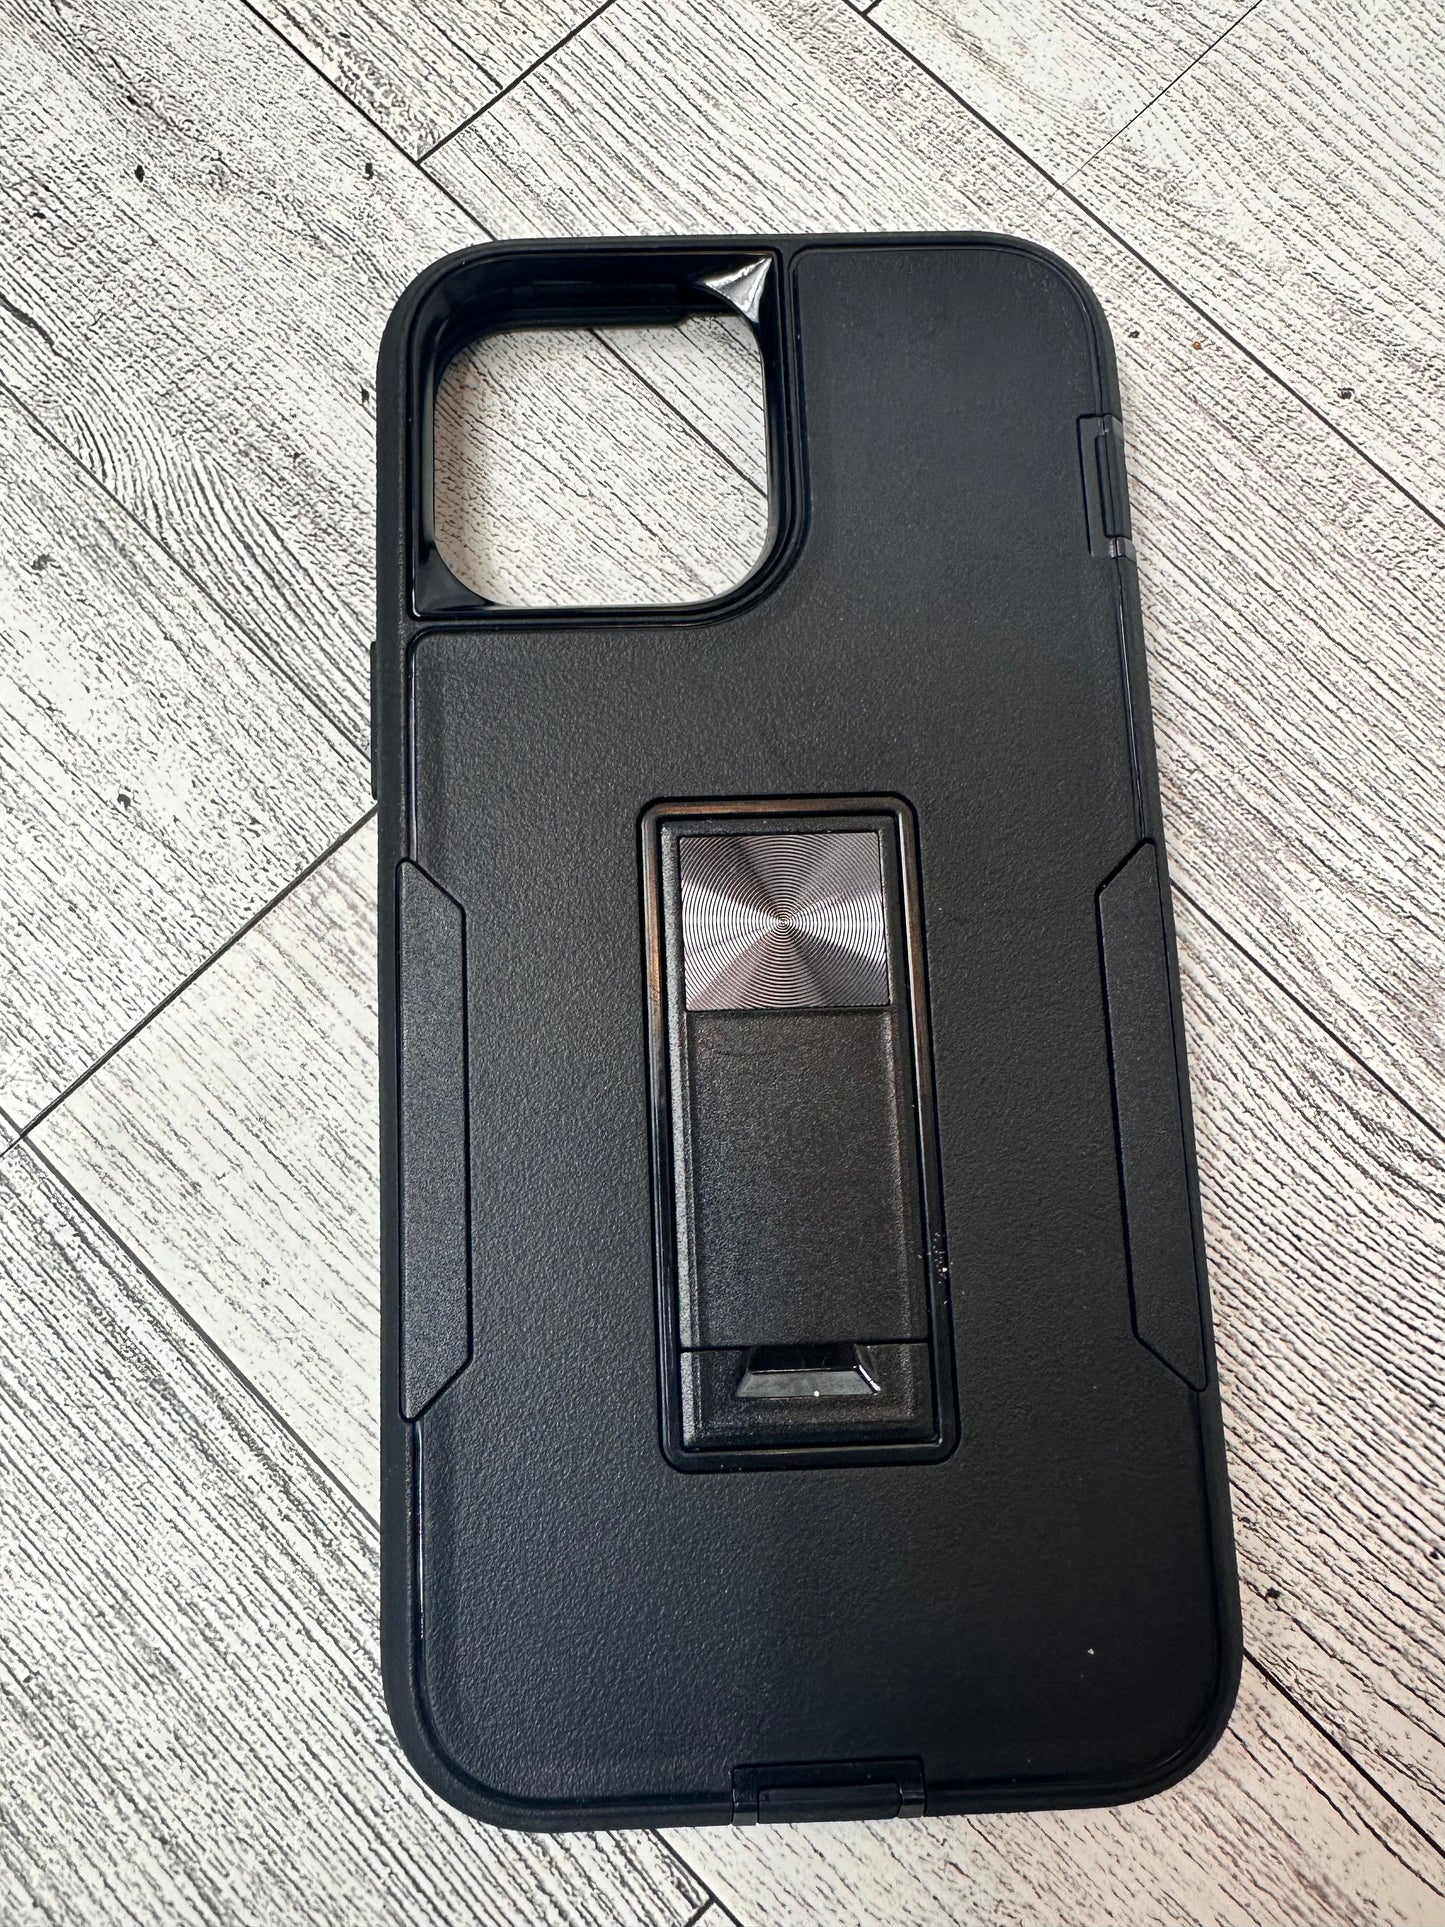 iPhone 13 Pro Max with kick stand